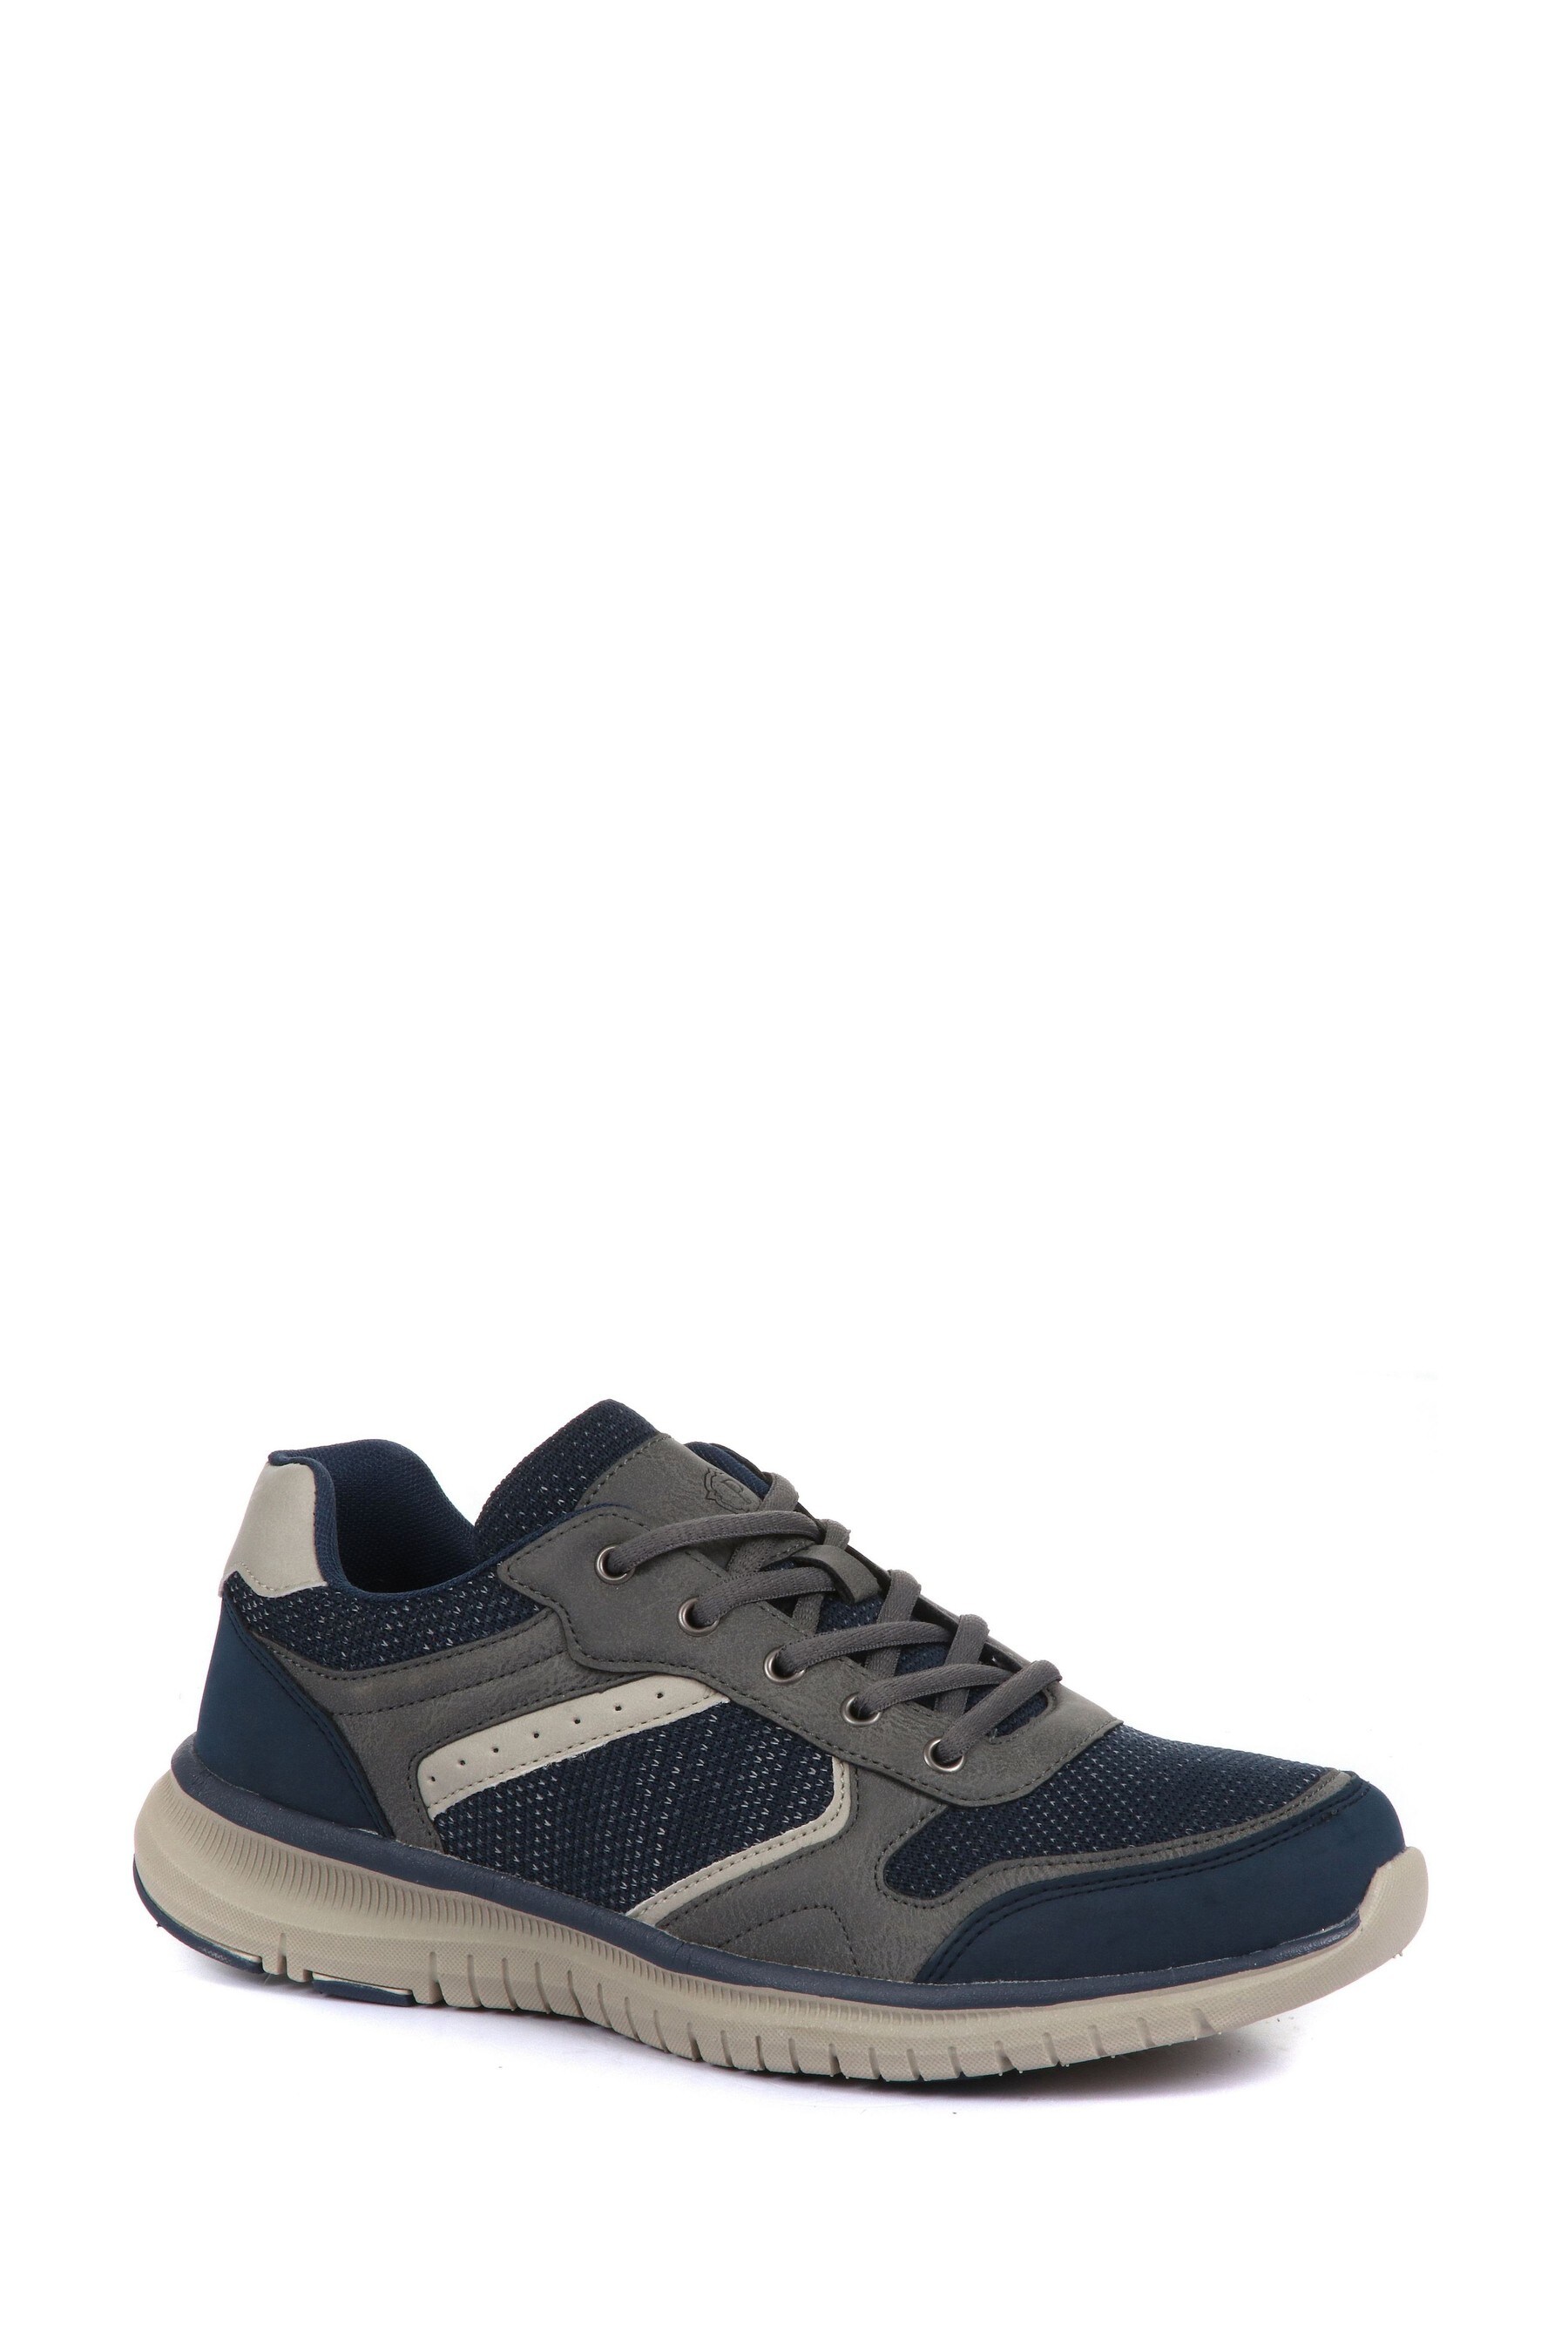 Buy Pavers Men's Casual Trainers from the Next UK online shop